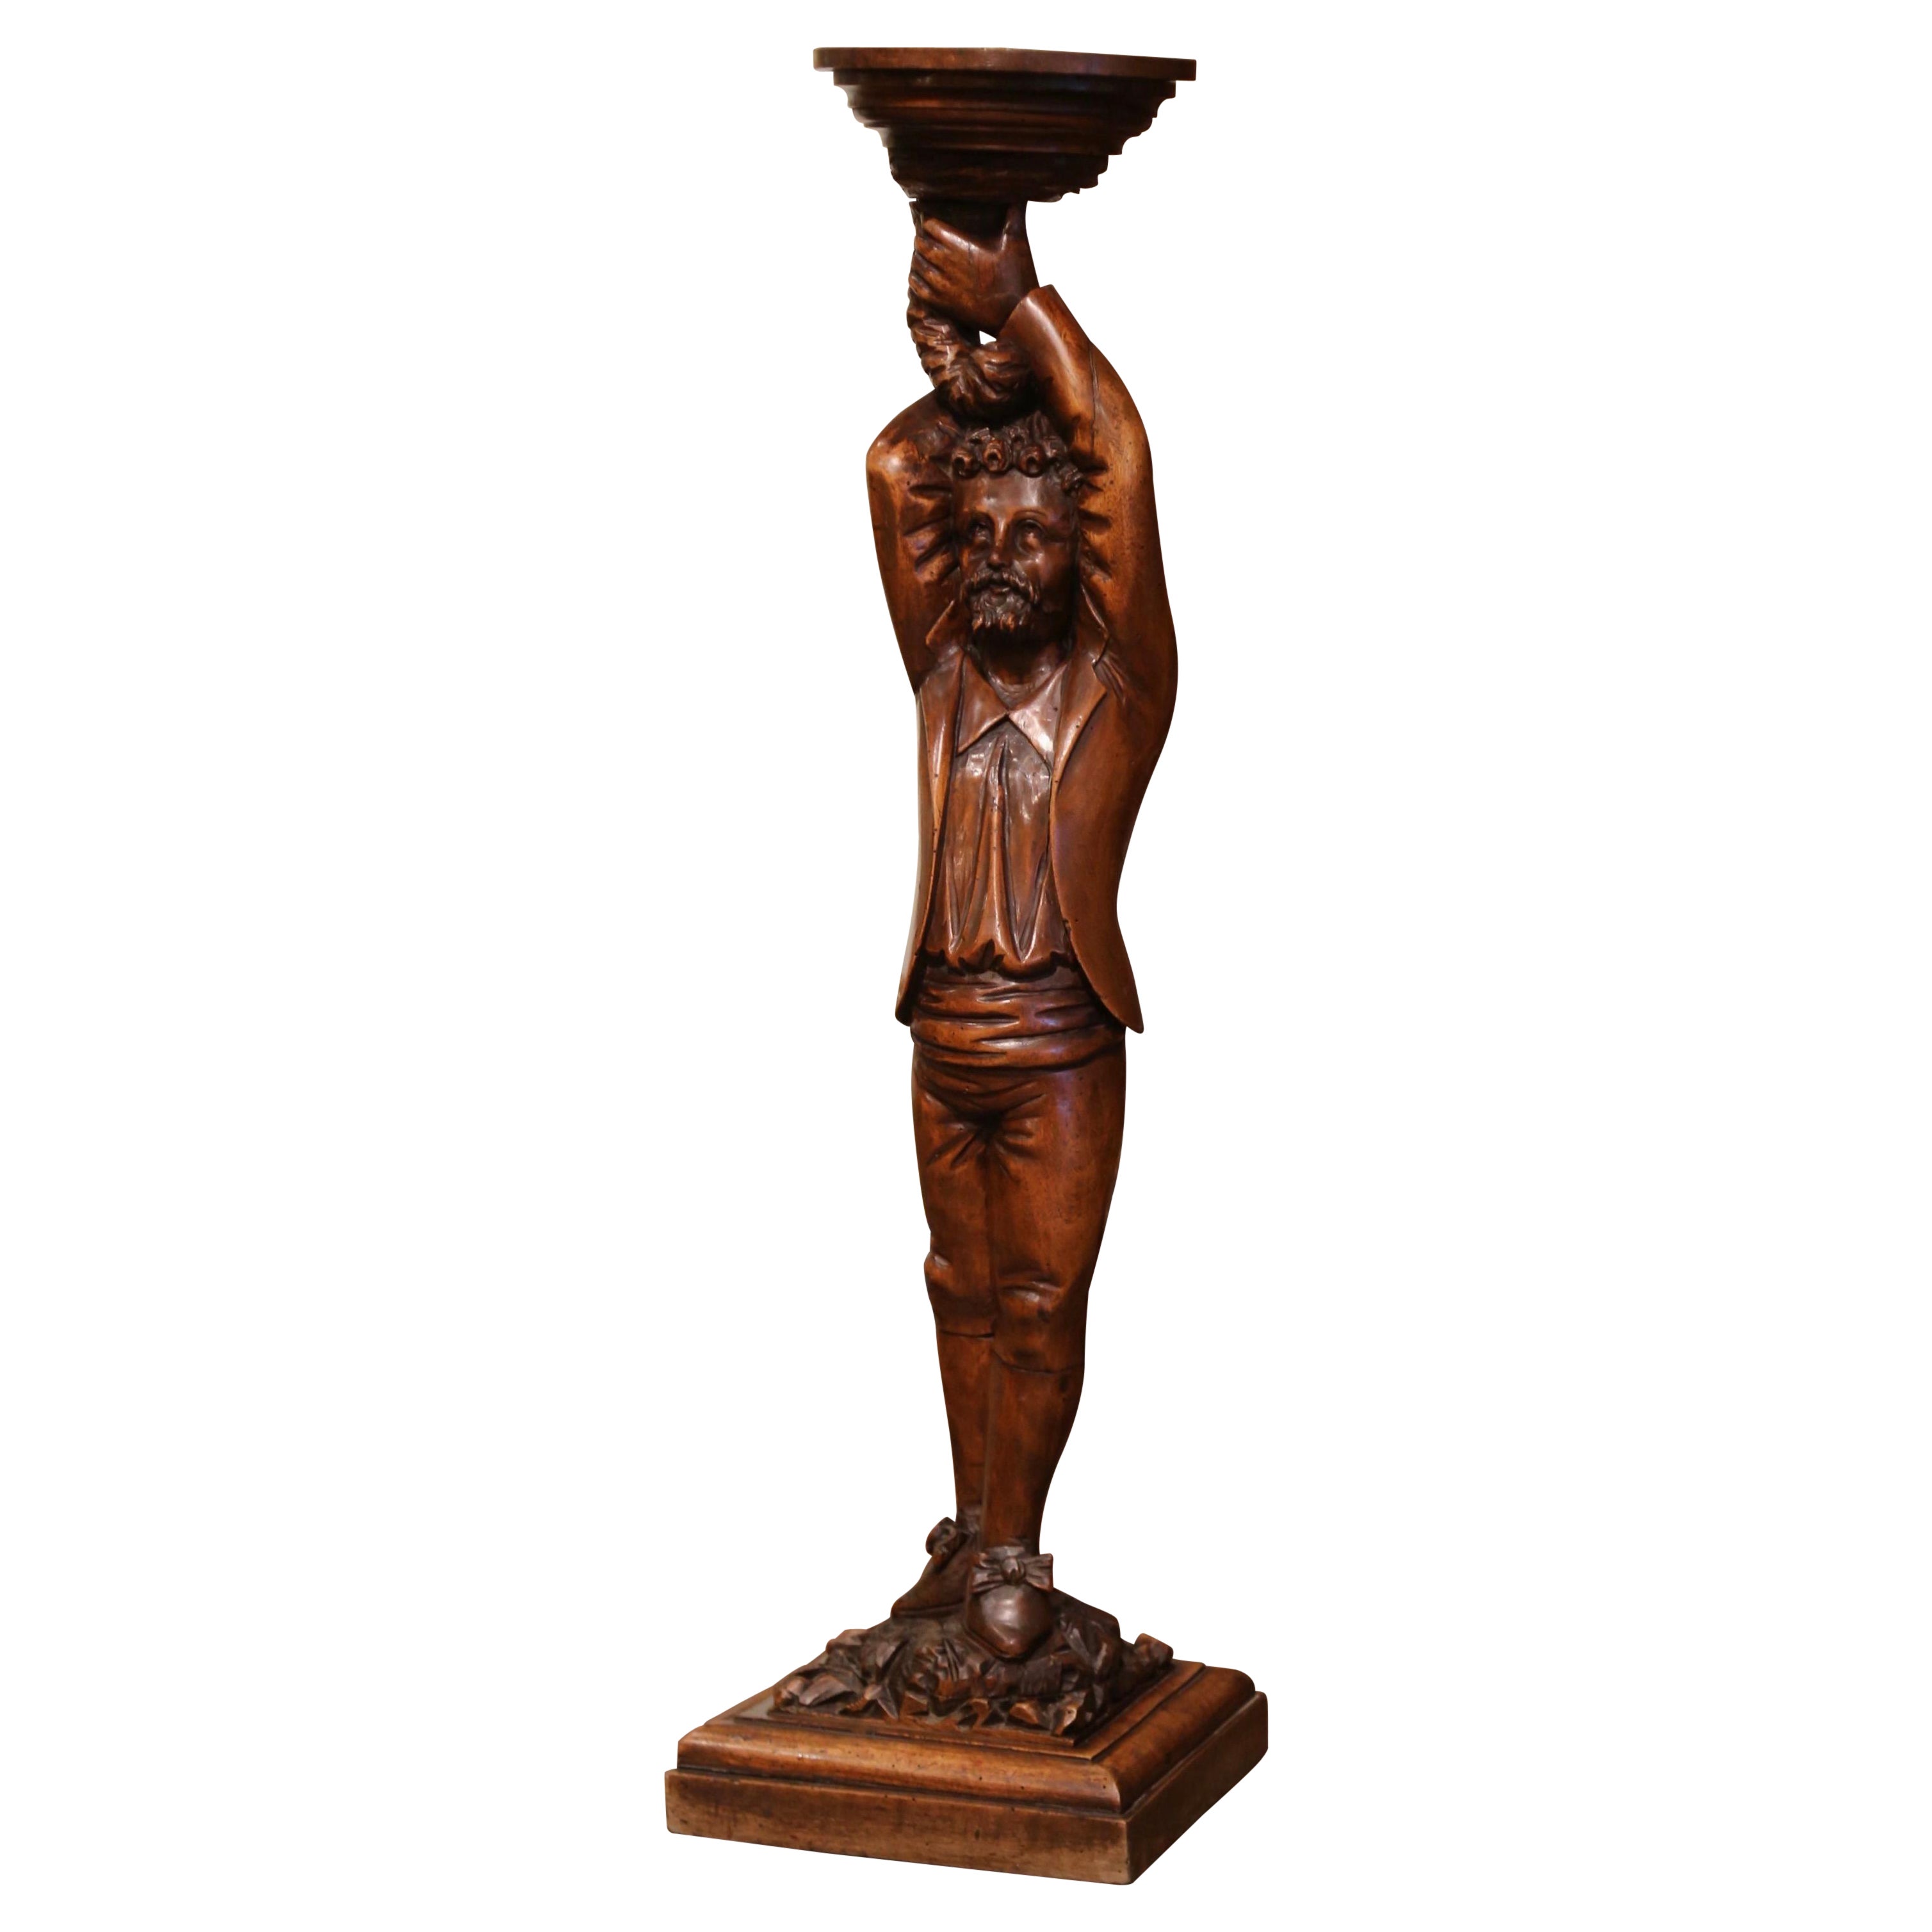 Mid-19th Century French Carved Walnut Pedestal Table with Gentleman Sculpture